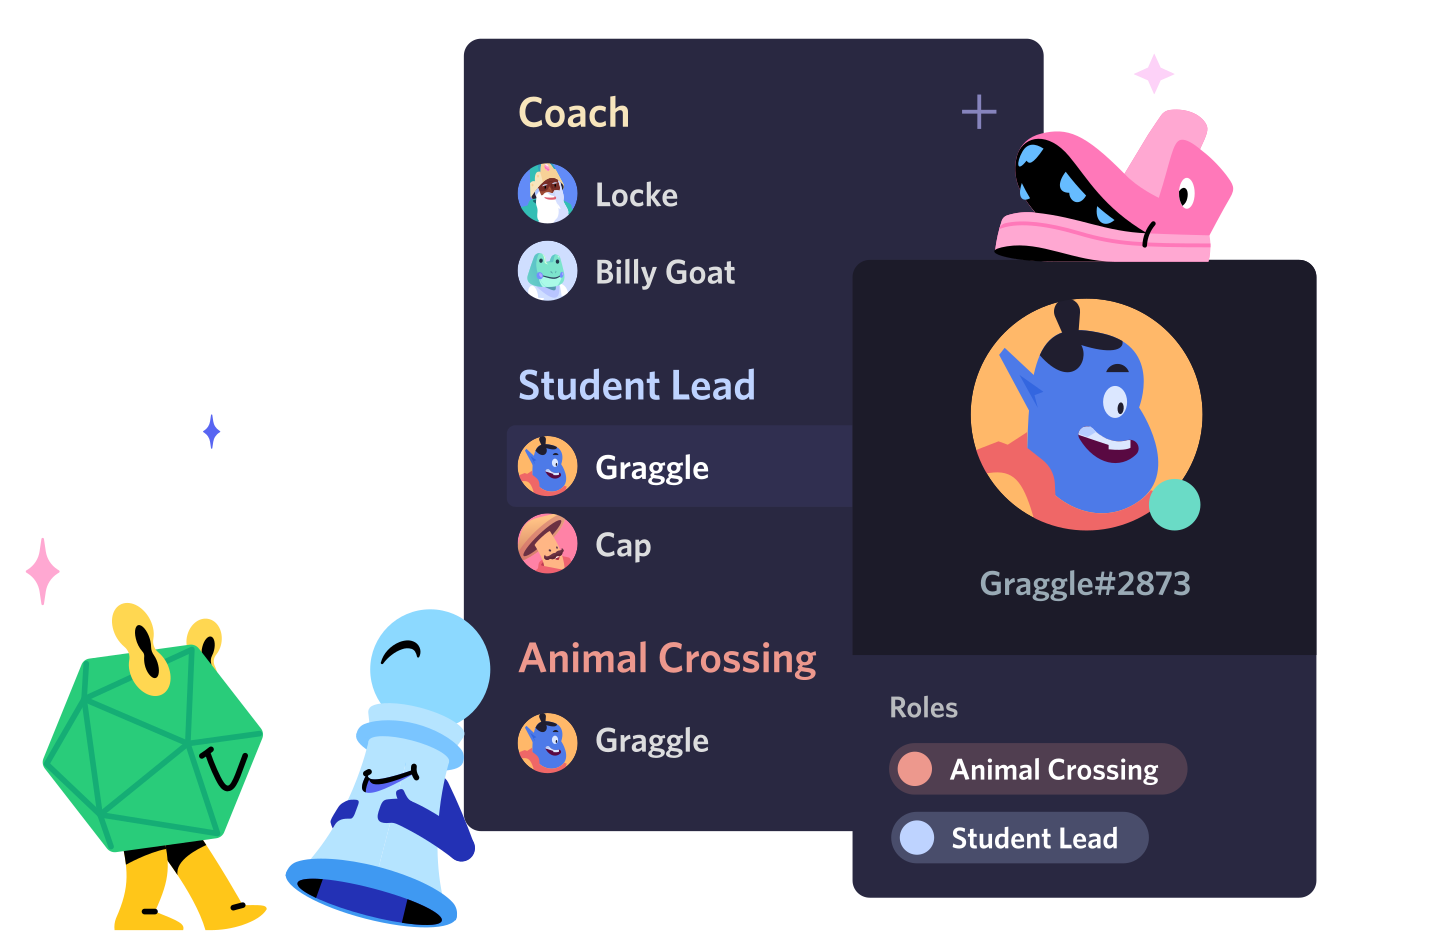 Stylized image showing friends in a server organized into roles for Coach, Student Lead, and Animal Crossing.